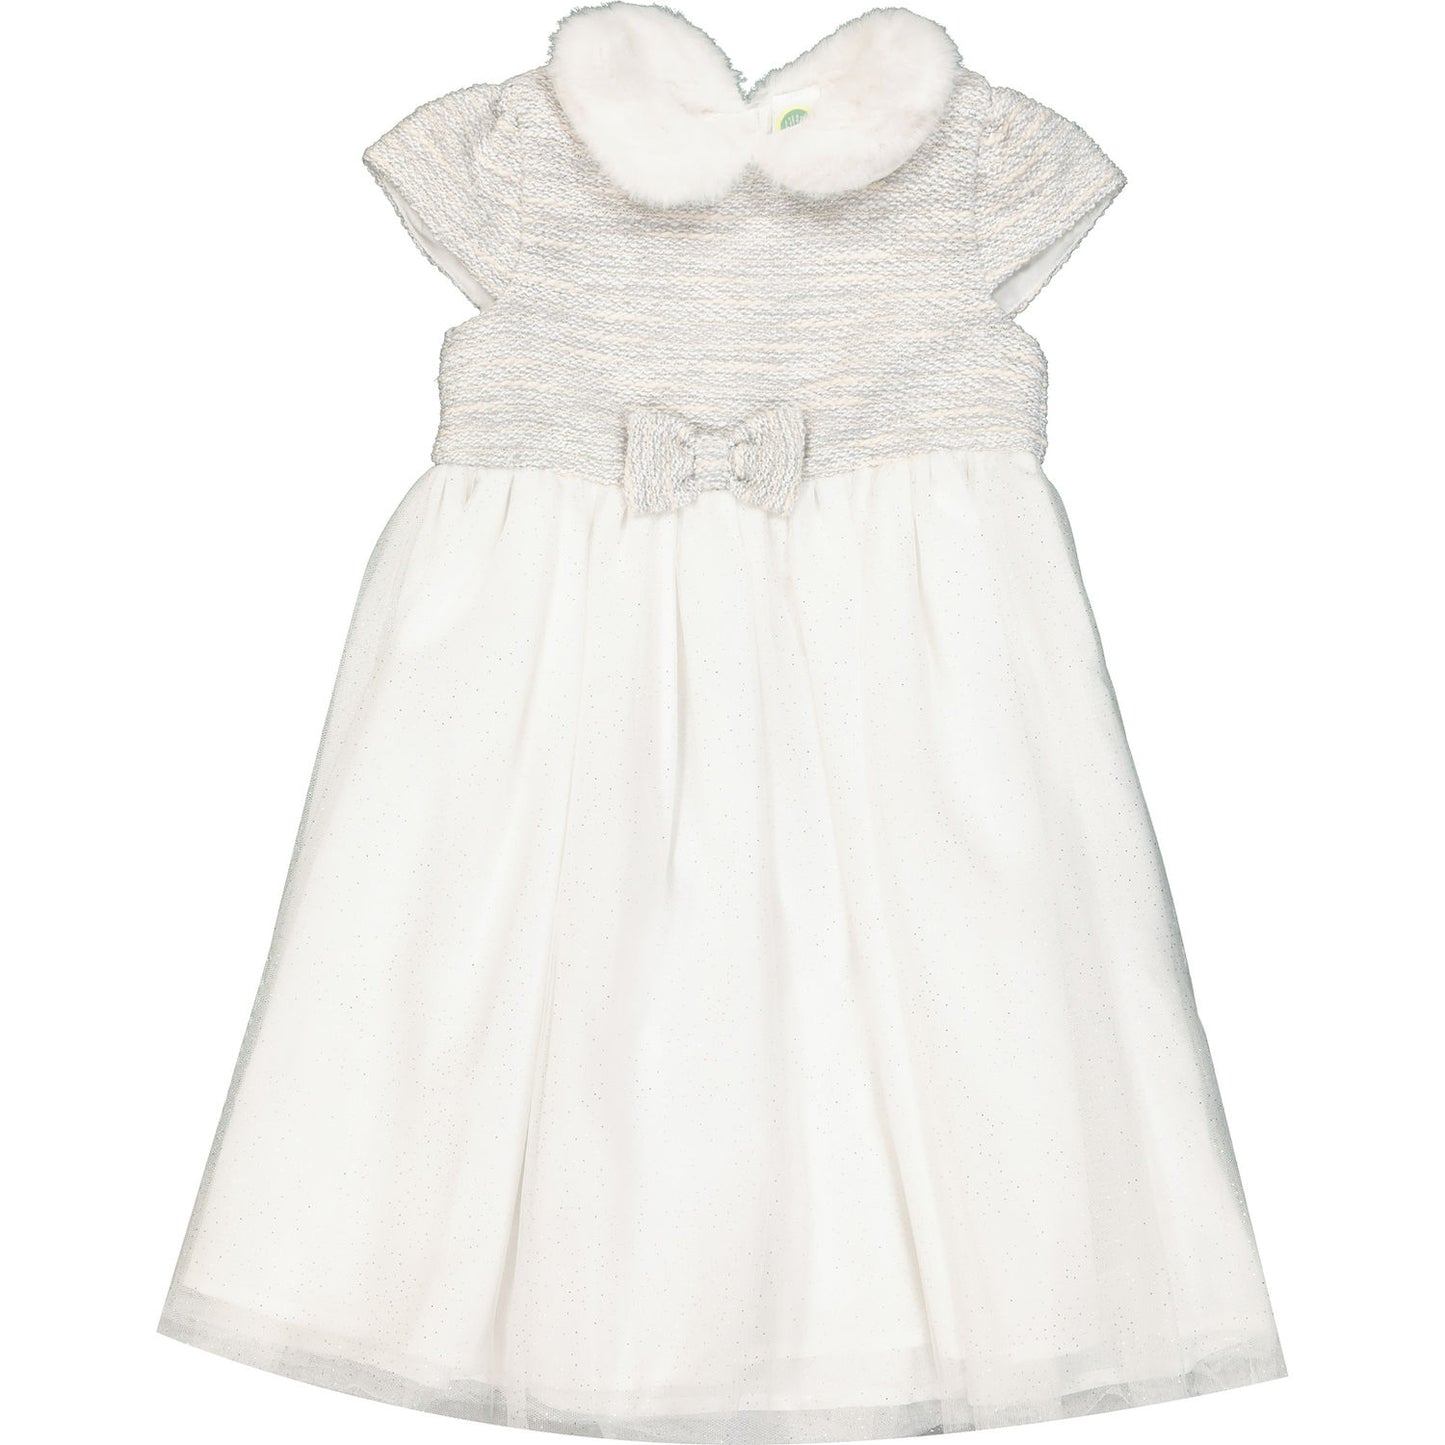 Snow Princess White and Silver Glitter Party Dress Age 2, 3 & 4 Years